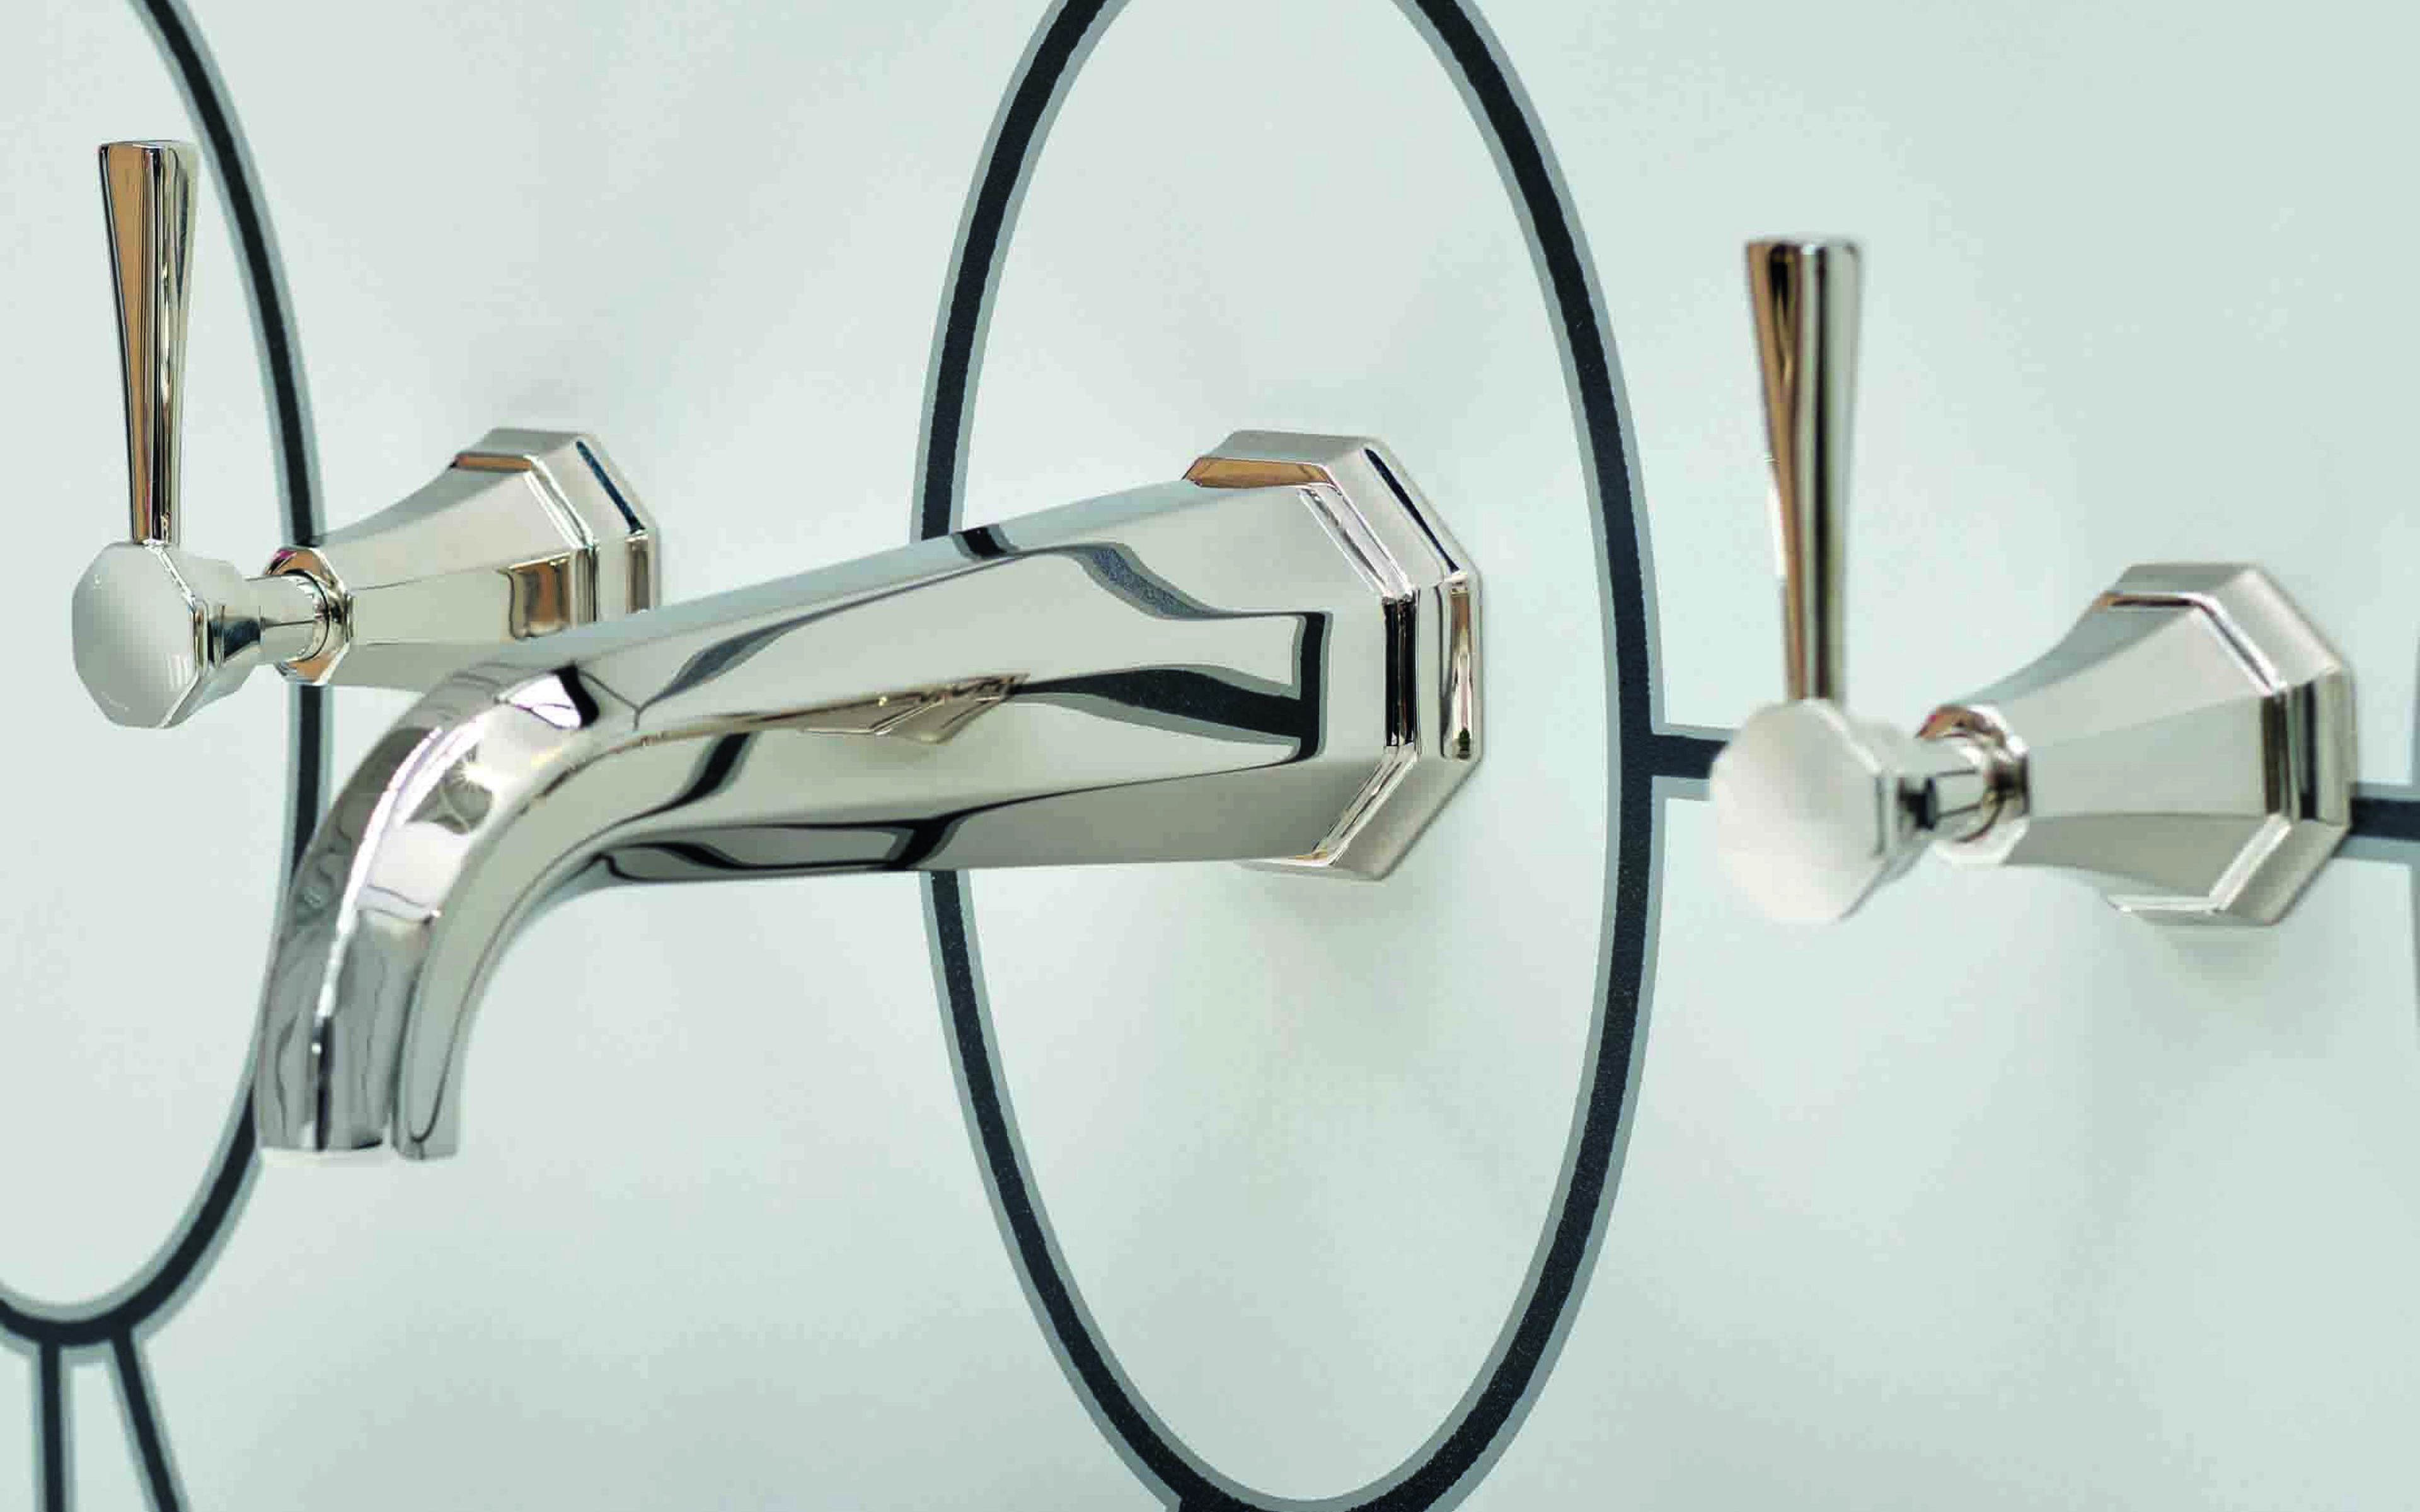 Deco Three-Hole Wall-Mounted Basin Mixer with Lever Handles - Nickel